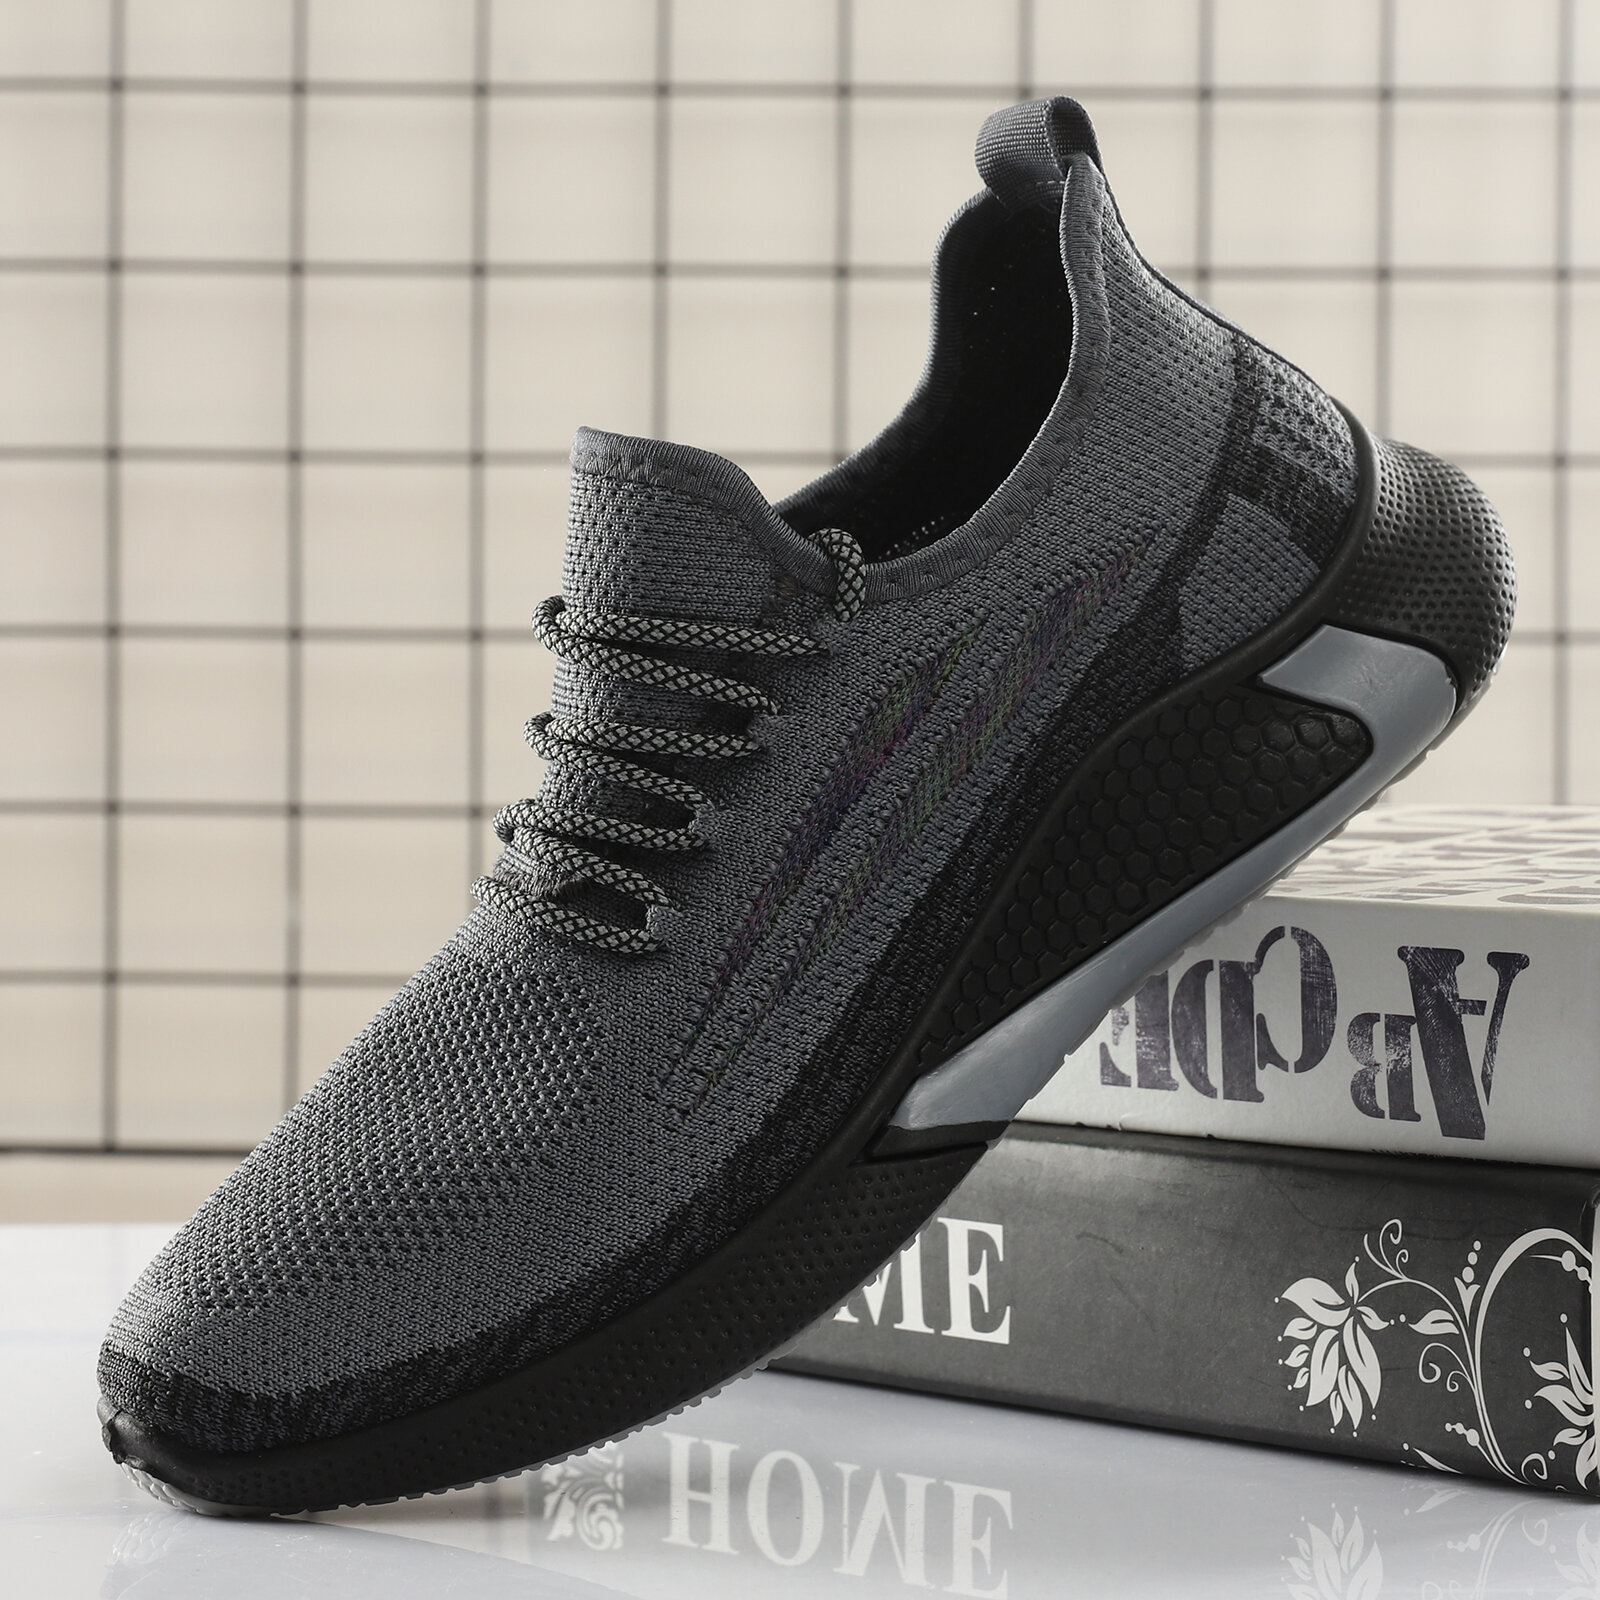 Men's Breathable Knit Soft Slip-On Lightweight Casual Sneakers Jogging Shoes